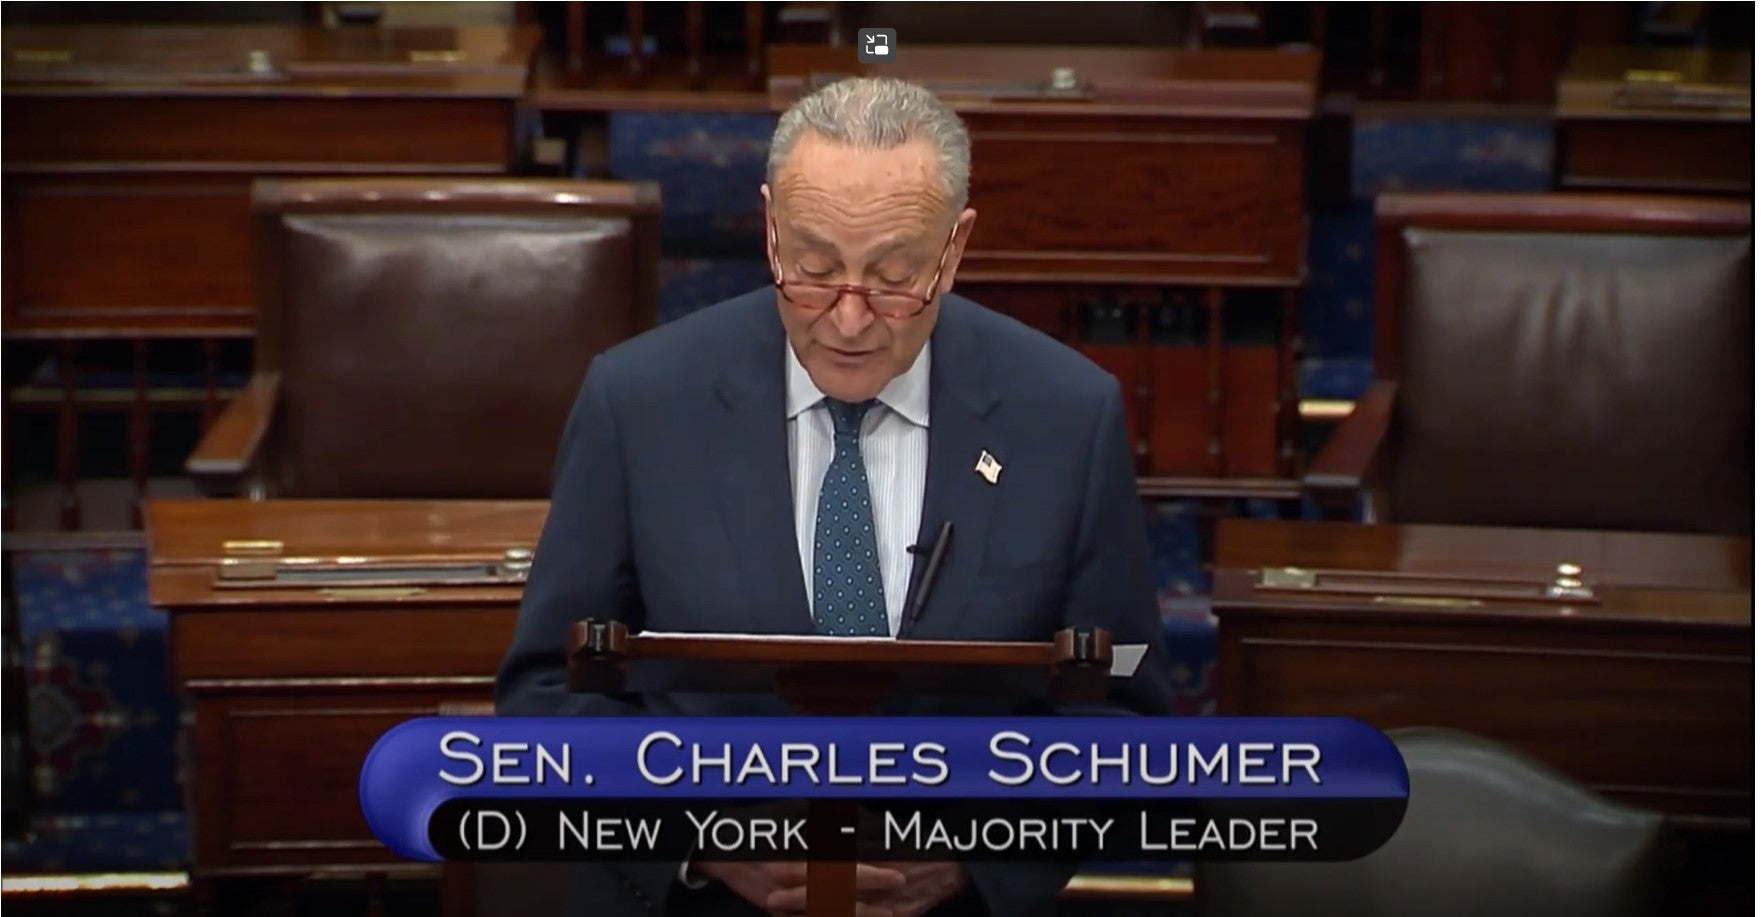 Senator Charles Schumer Gives a Shout Out to John’s Crazy Socks from the Senate Floor